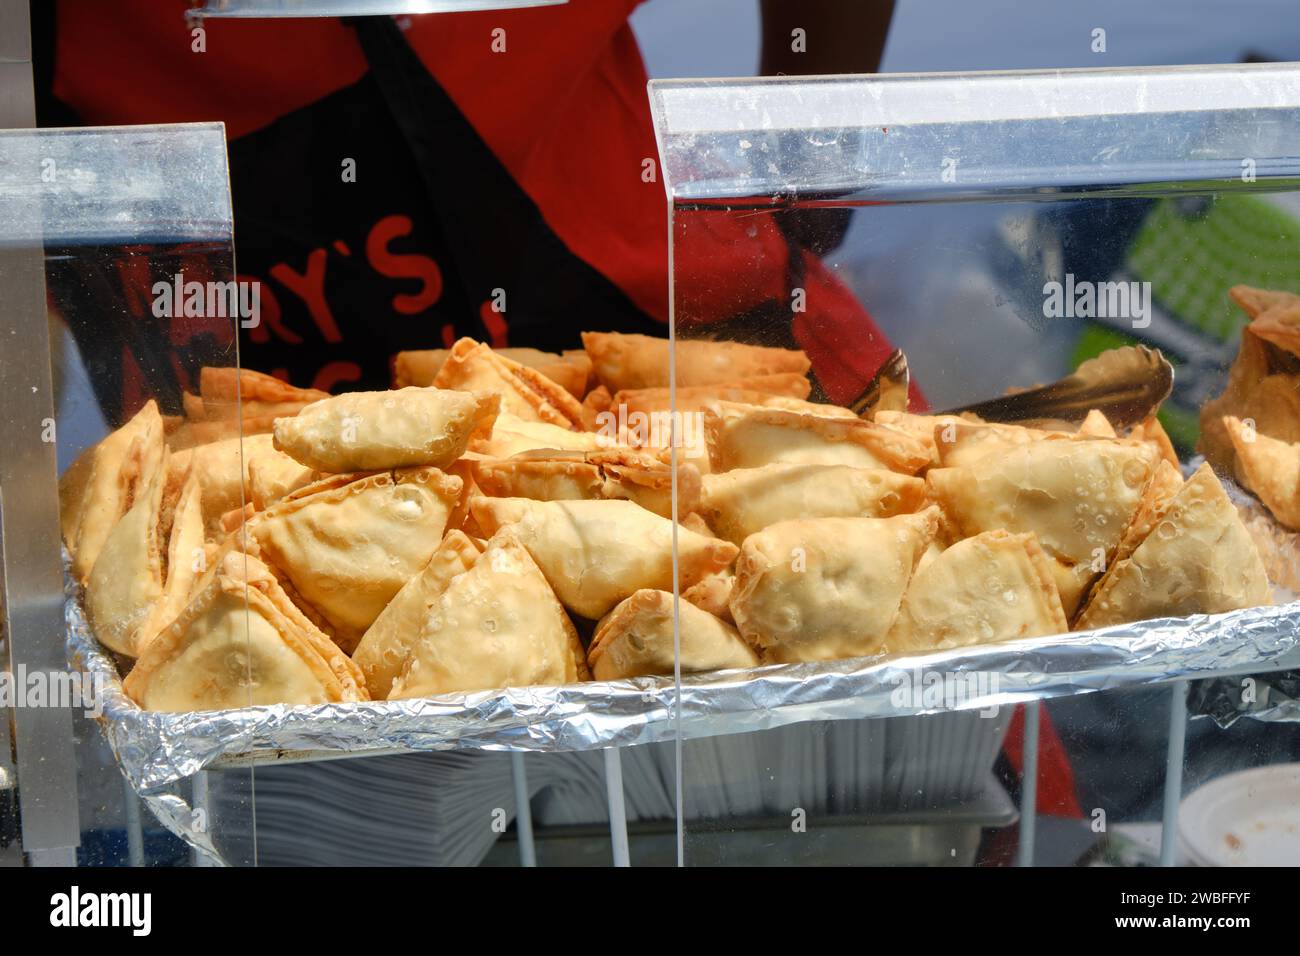 Samosas on offer at food stand in outdoor food festival Stock Photo